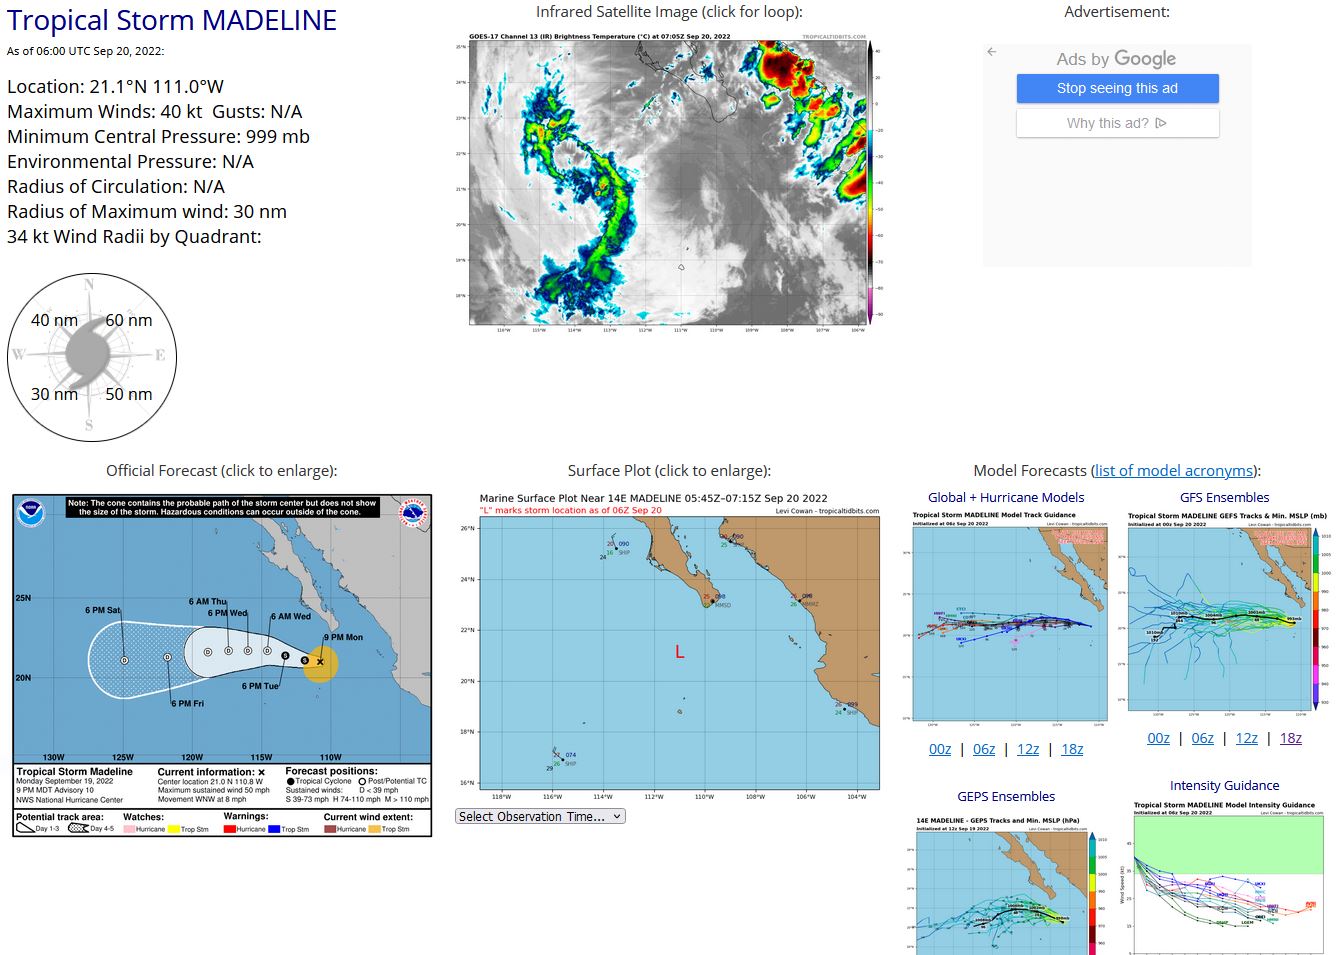 000 WTPZ44 KNHC 200243 TCDEP4  Tropical Storm Madeline Discussion Number  10 NWS National Hurricane Center Miami FL       EP142022 900 PM MDT Mon Sep 19 2022  Madeline is on a gradual decline.  The deep convection that is  confined to the west of the cyclone's low-level center is slowly  decaying in the presence of 20 kt of east-northeasterly shear and  marginal SSTs of 26 degrees C.  The latest Dvorak T-numbers from  TAFB, SAB, and the UW-CIMSS ADT have decreased from 6 h ago, and a  blend of their CI values suggest that the initial intensity has  decreased to 45 kt.  Madeline continues to move west-northwestward, or 285/7 kt.  An  ongoing west-northwestward motion is expected during the next day  or so while the storm remains steered by a deep-layer ridge  centered over southern Texas.  After that time, a turn to the west  is expected when the system becomes shallow and moves within the  low-level trade winds.  The NHC track forecast is little changed  from the previous one and is near the various multi-model consensus  tracks.   The east-northeasterly shear is expected to persist while Madeline  moves into a region of drier air and over cooler SSTs.  Therefore  steady weakening is expected, and the cyclone is expected to  degenerate into post-tropical remnant low, devoid of persistent  organized deep convection, by early Wednesday.  The latest NHC  intensity forecast was nudged slightly lower through 48 h due to the  decrease in the initial intensity, but remains slightly higher than  the HCCA and IVCN consensus.   FORECAST POSITIONS AND MAX WINDS  INIT  20/0300Z 21.0N 110.8W   45 KT  50 MPH  12H  20/1200Z 21.1N 111.9W   40 KT  45 MPH  24H  21/0000Z 21.4N 113.3W   35 KT  40 MPH  36H  21/1200Z 21.7N 114.6W   30 KT  35 MPH...POST-TROP/REMNT LOW  48H  22/0000Z 21.7N 116.0W   30 KT  35 MPH...POST-TROP/REMNT LOW  60H  22/1200Z 21.7N 117.4W   25 KT  30 MPH...POST-TROP/REMNT LOW  72H  23/0000Z 21.6N 118.9W   25 KT  30 MPH...POST-TROP/REMNT LOW  96H  24/0000Z 21.3N 121.8W   25 KT  30 MPH...POST-TROP/REMNT LOW 120H  25/0000Z 21.1N 124.9W   20 KT  25 MPH...POST-TROP/REMNT LOW  $$ Forecaster Latto